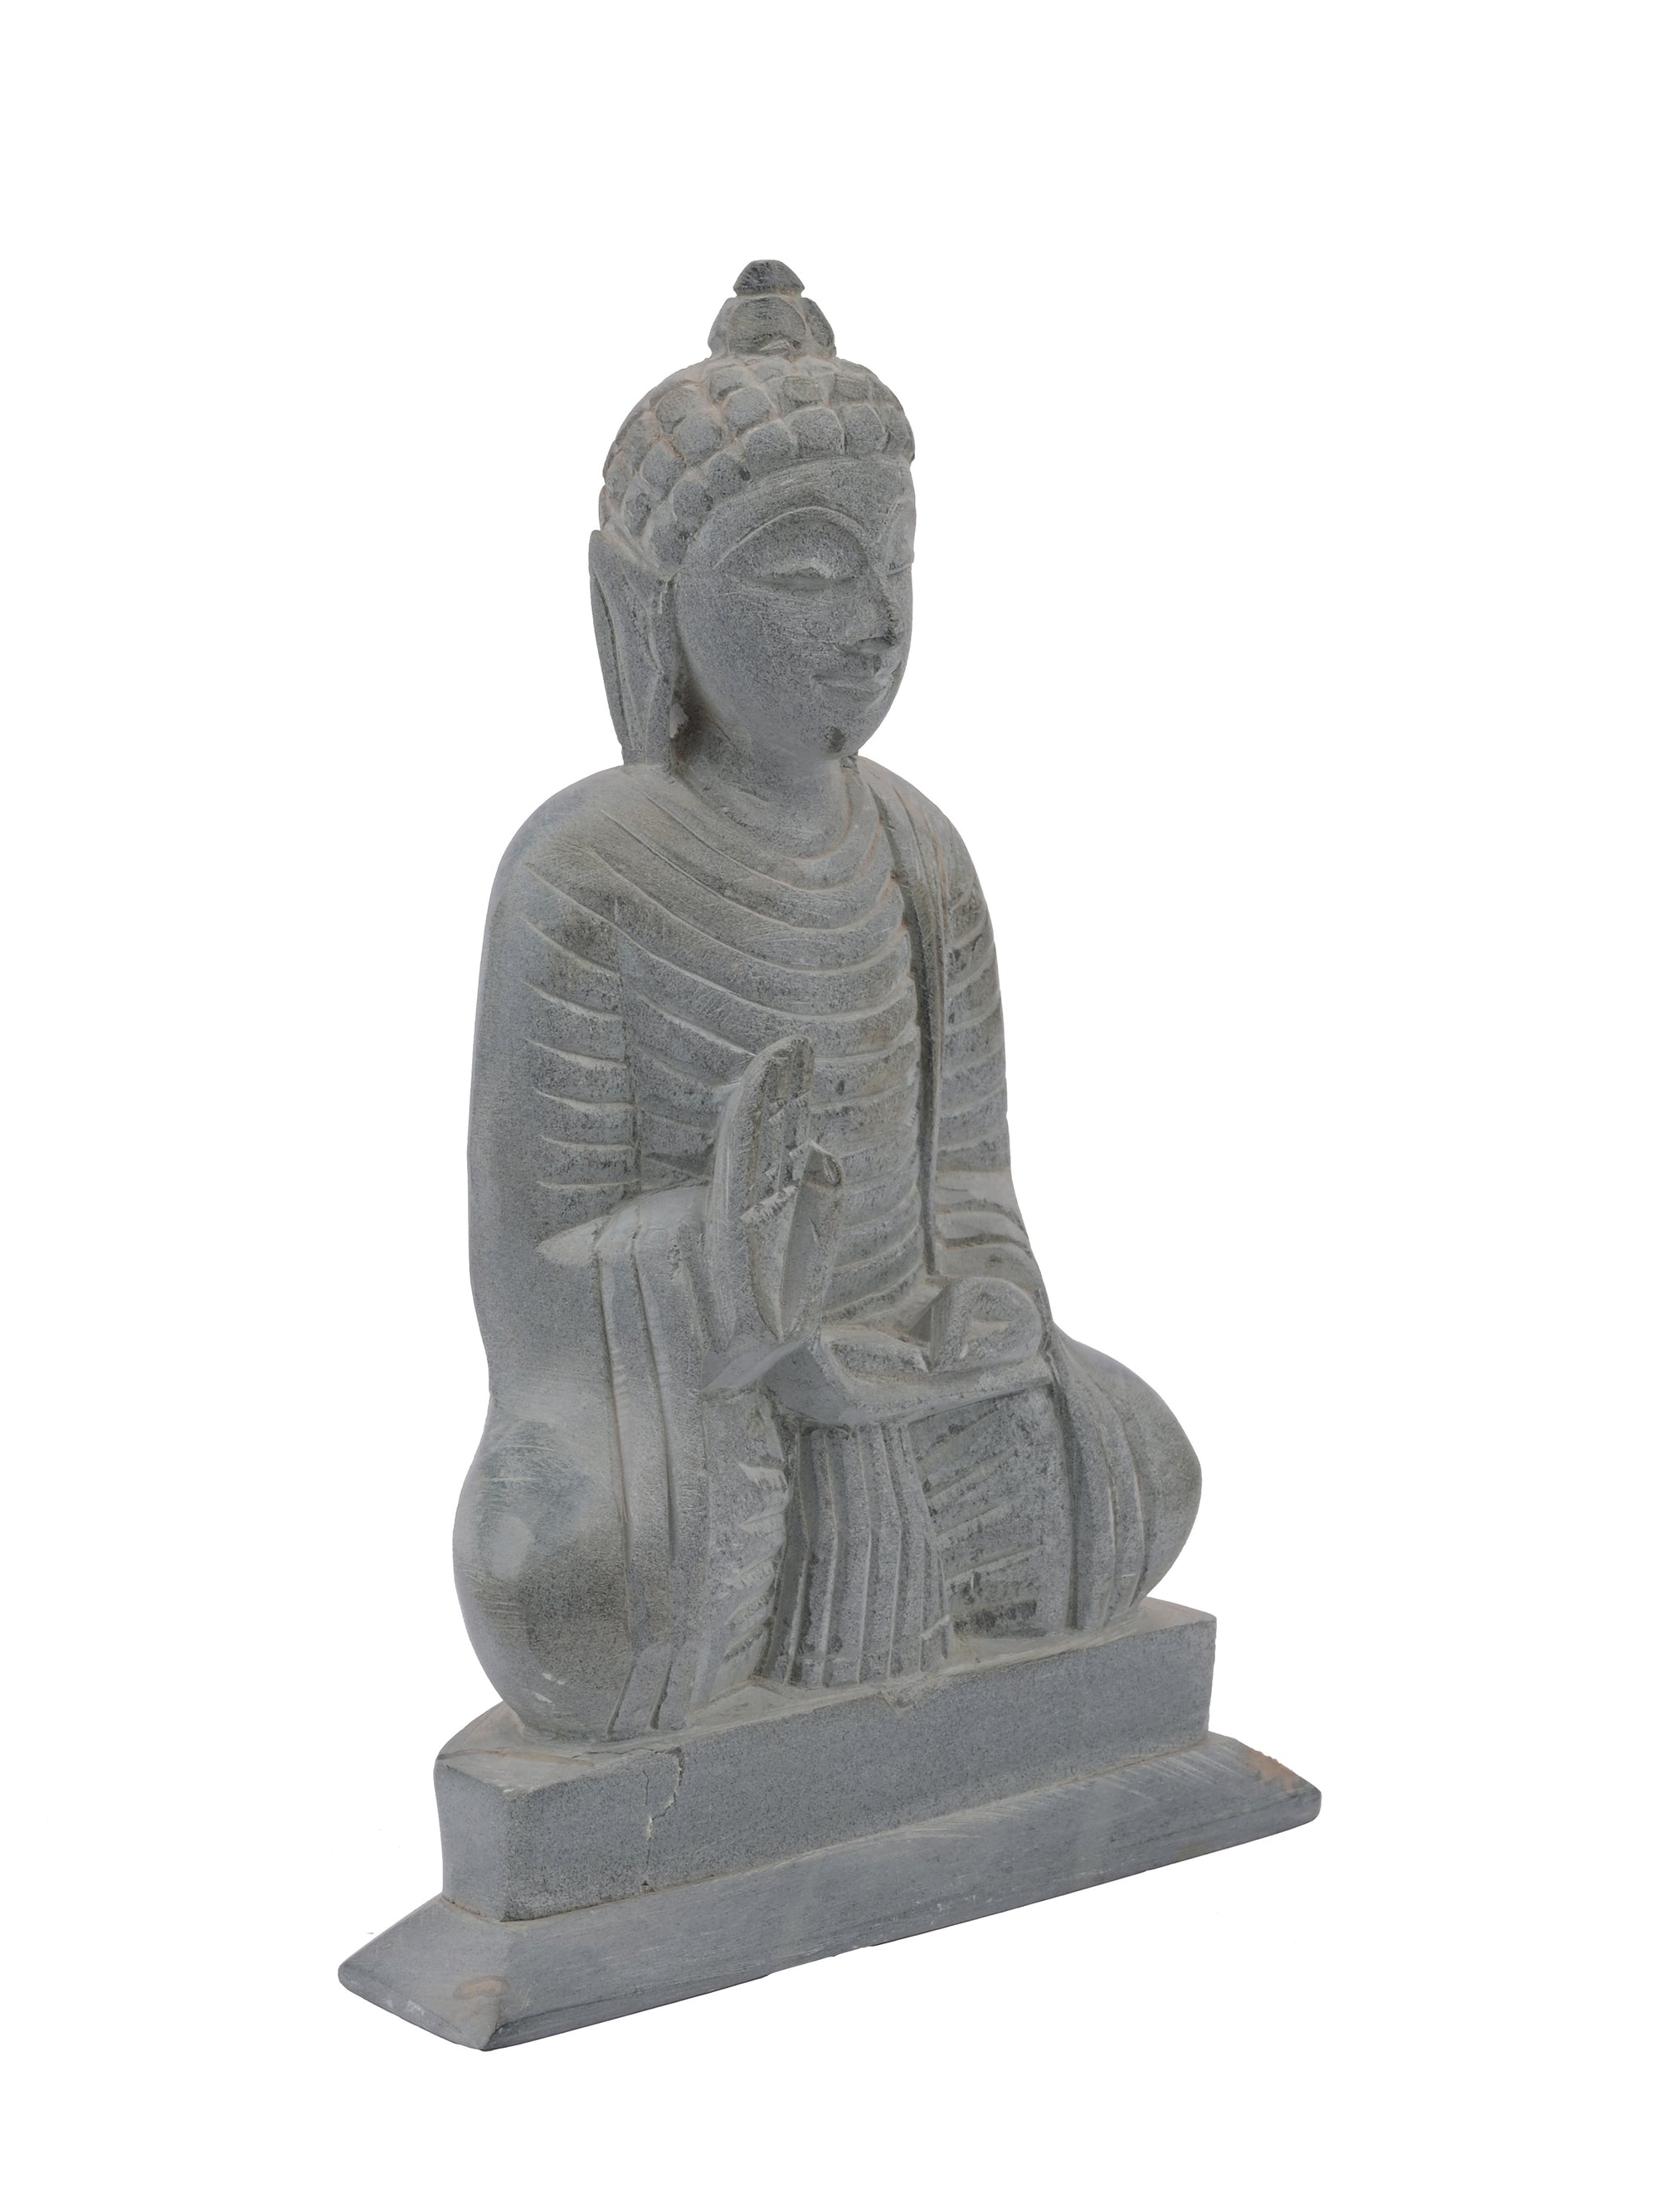 8 inches Sitting Buddha figurine hand crafted from Paleva stone - The Heritage Artifacts